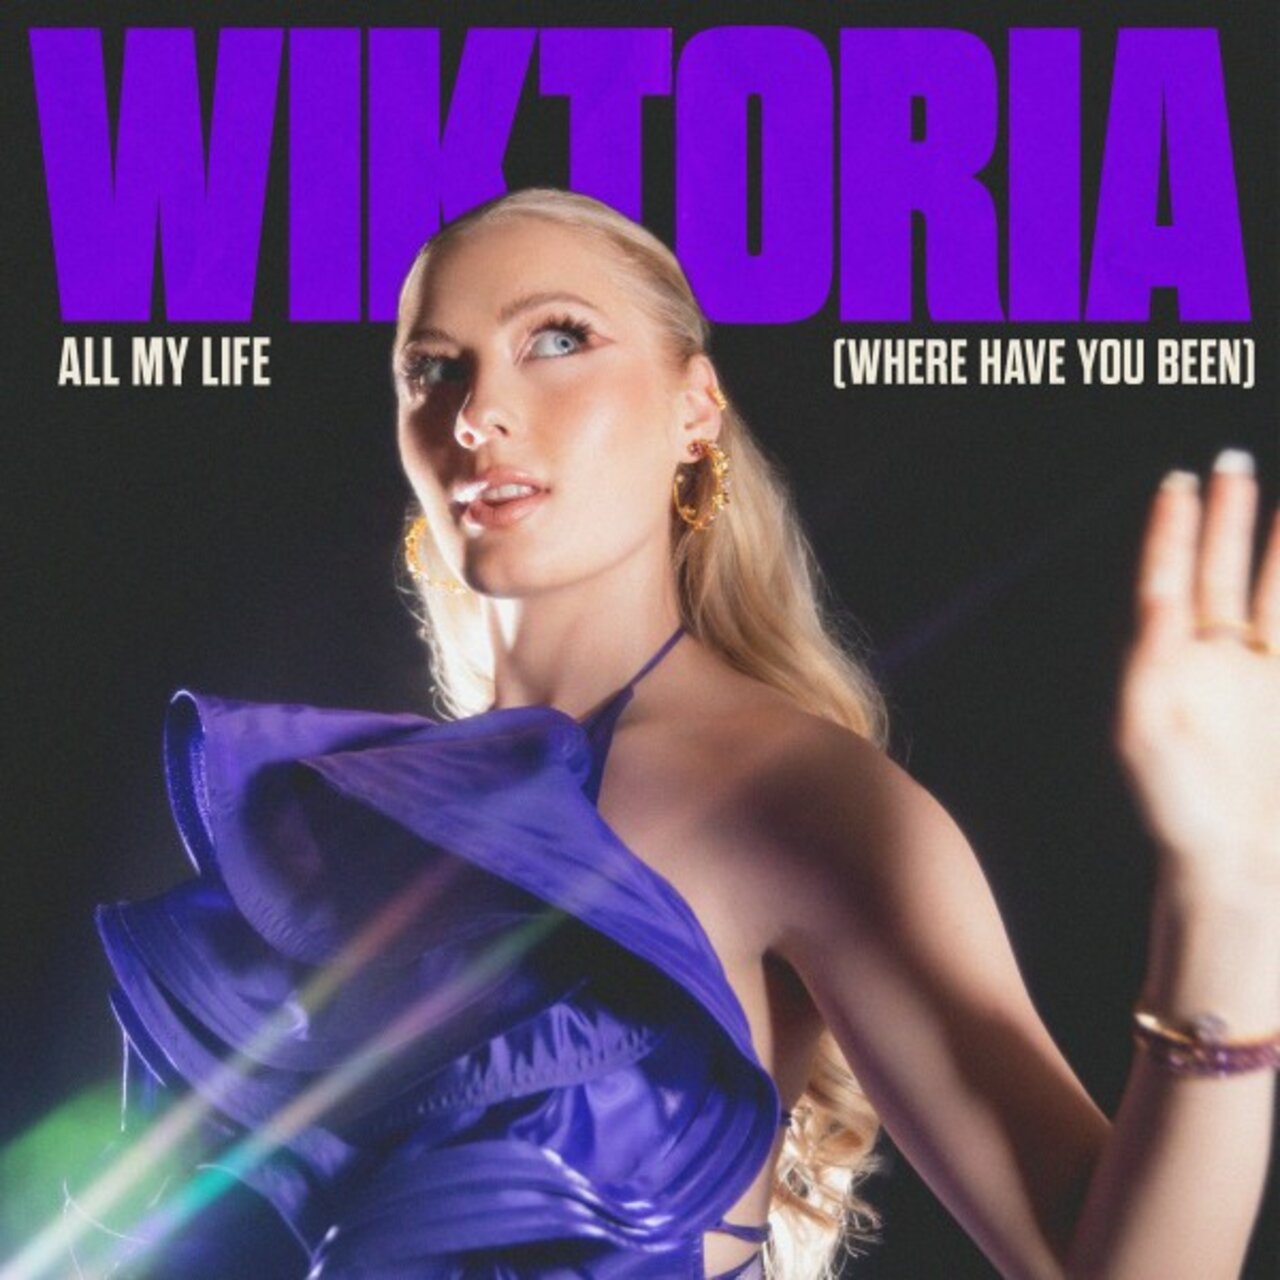 Wiktoria — All My Life (Where Have You Been) cover artwork